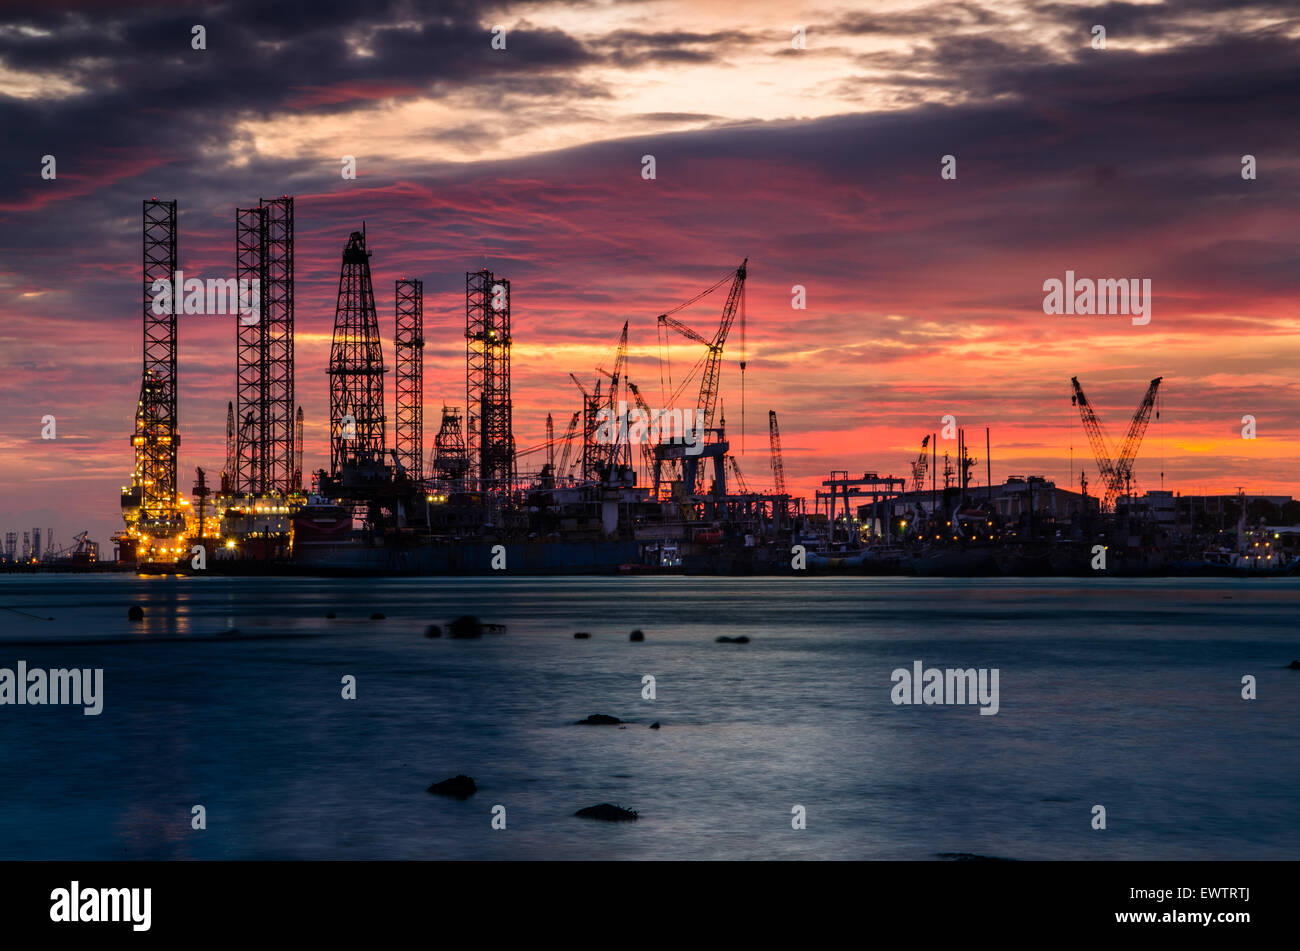 Beautiful Sunset with offshore platform. Low oil price had hit the industrial hard, left behind stranded drilling platform unable to bring on field. Stock Photo